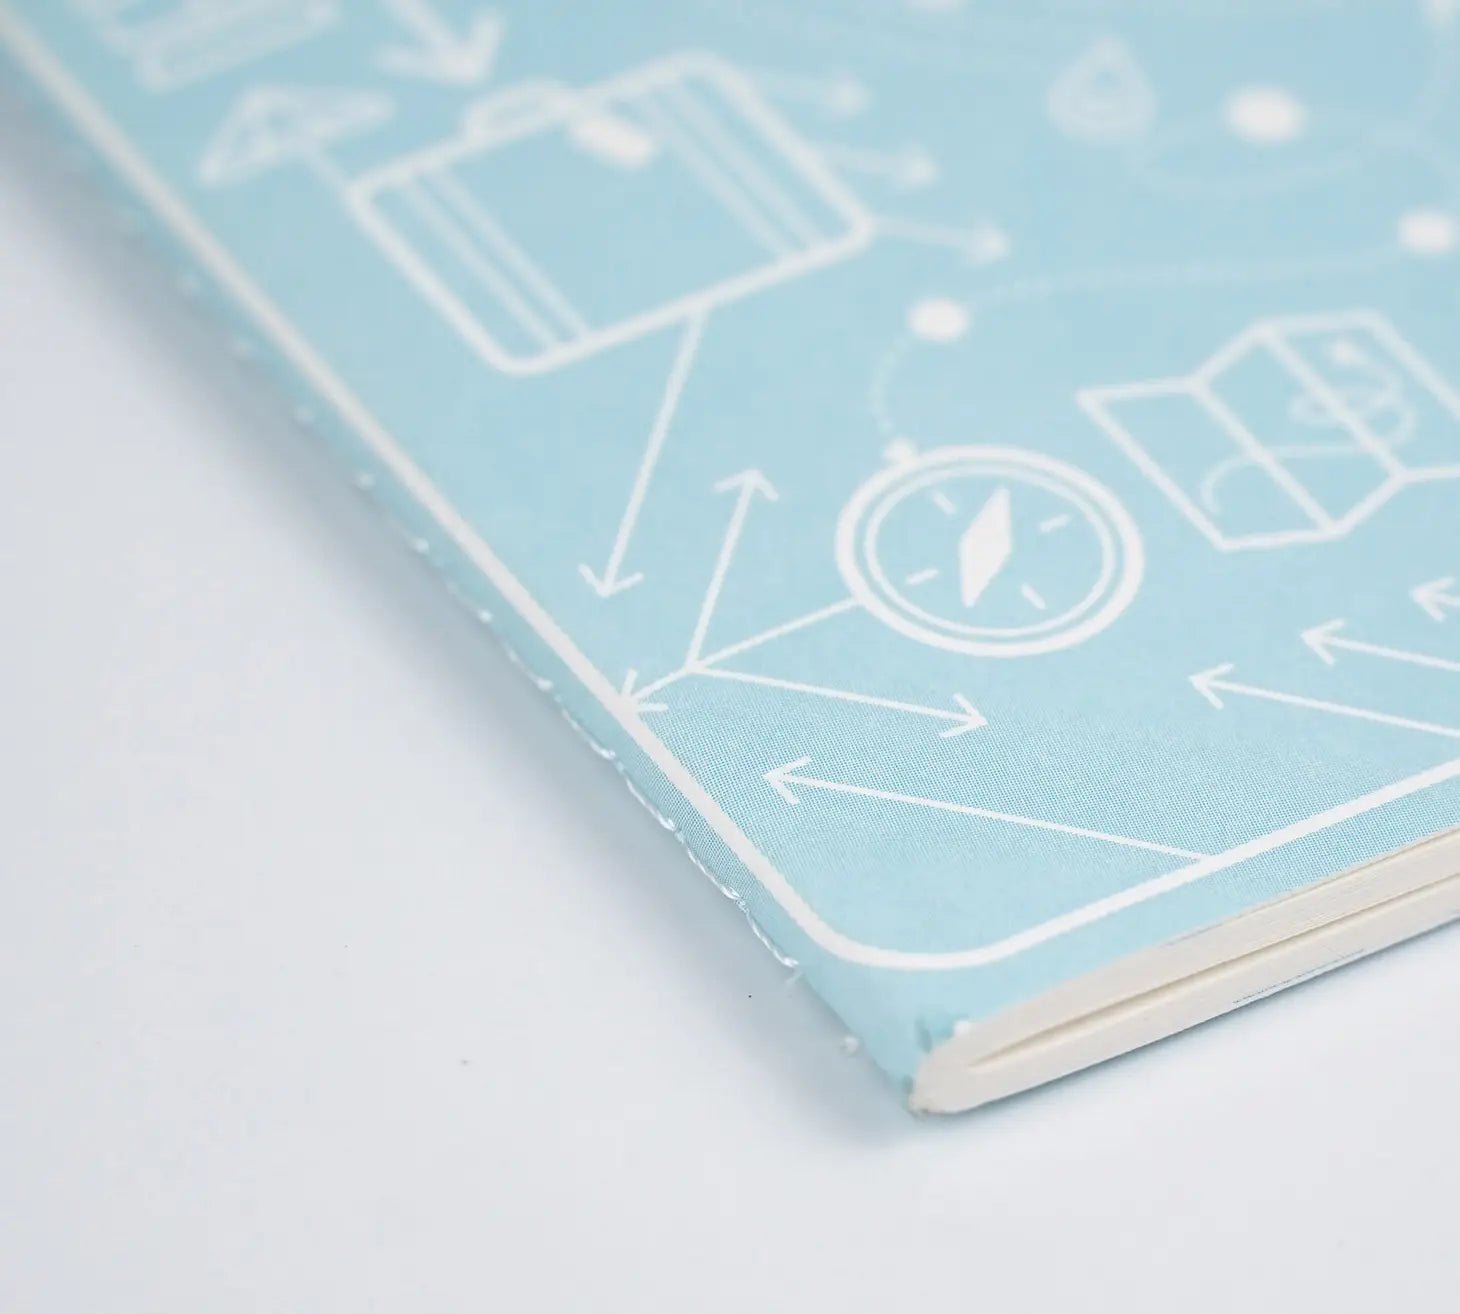 Lined Blue notebook w/ airplane drawing. Journaling for mind, body, & spirit well-being.